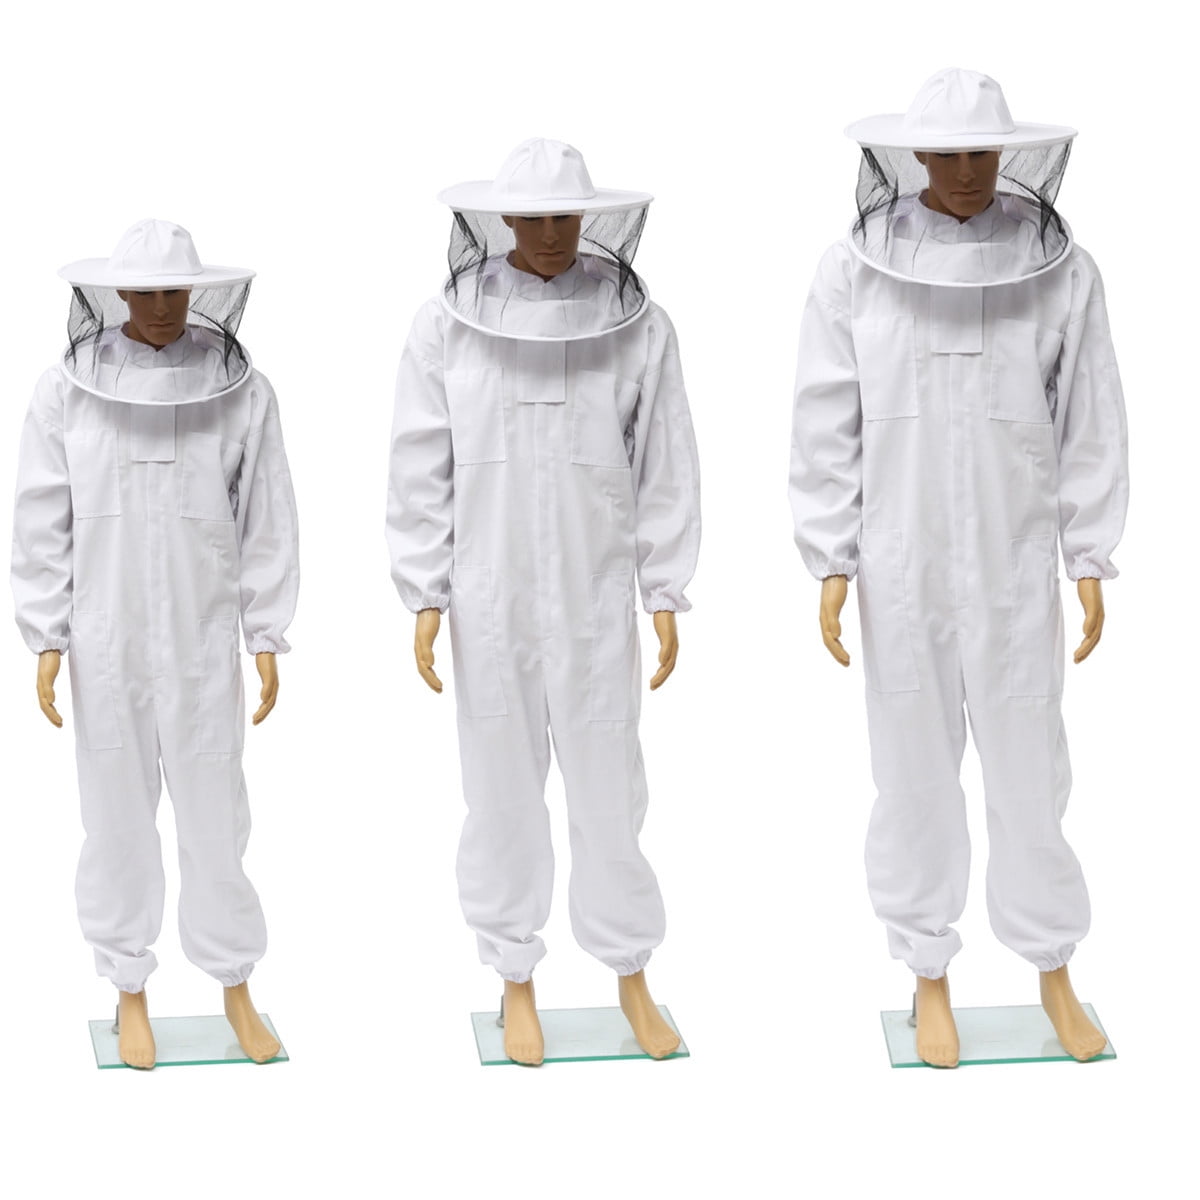 Beekeeping Ventilated Jacket Protection Beekeeper with Fency veil 1 x Free Glove 